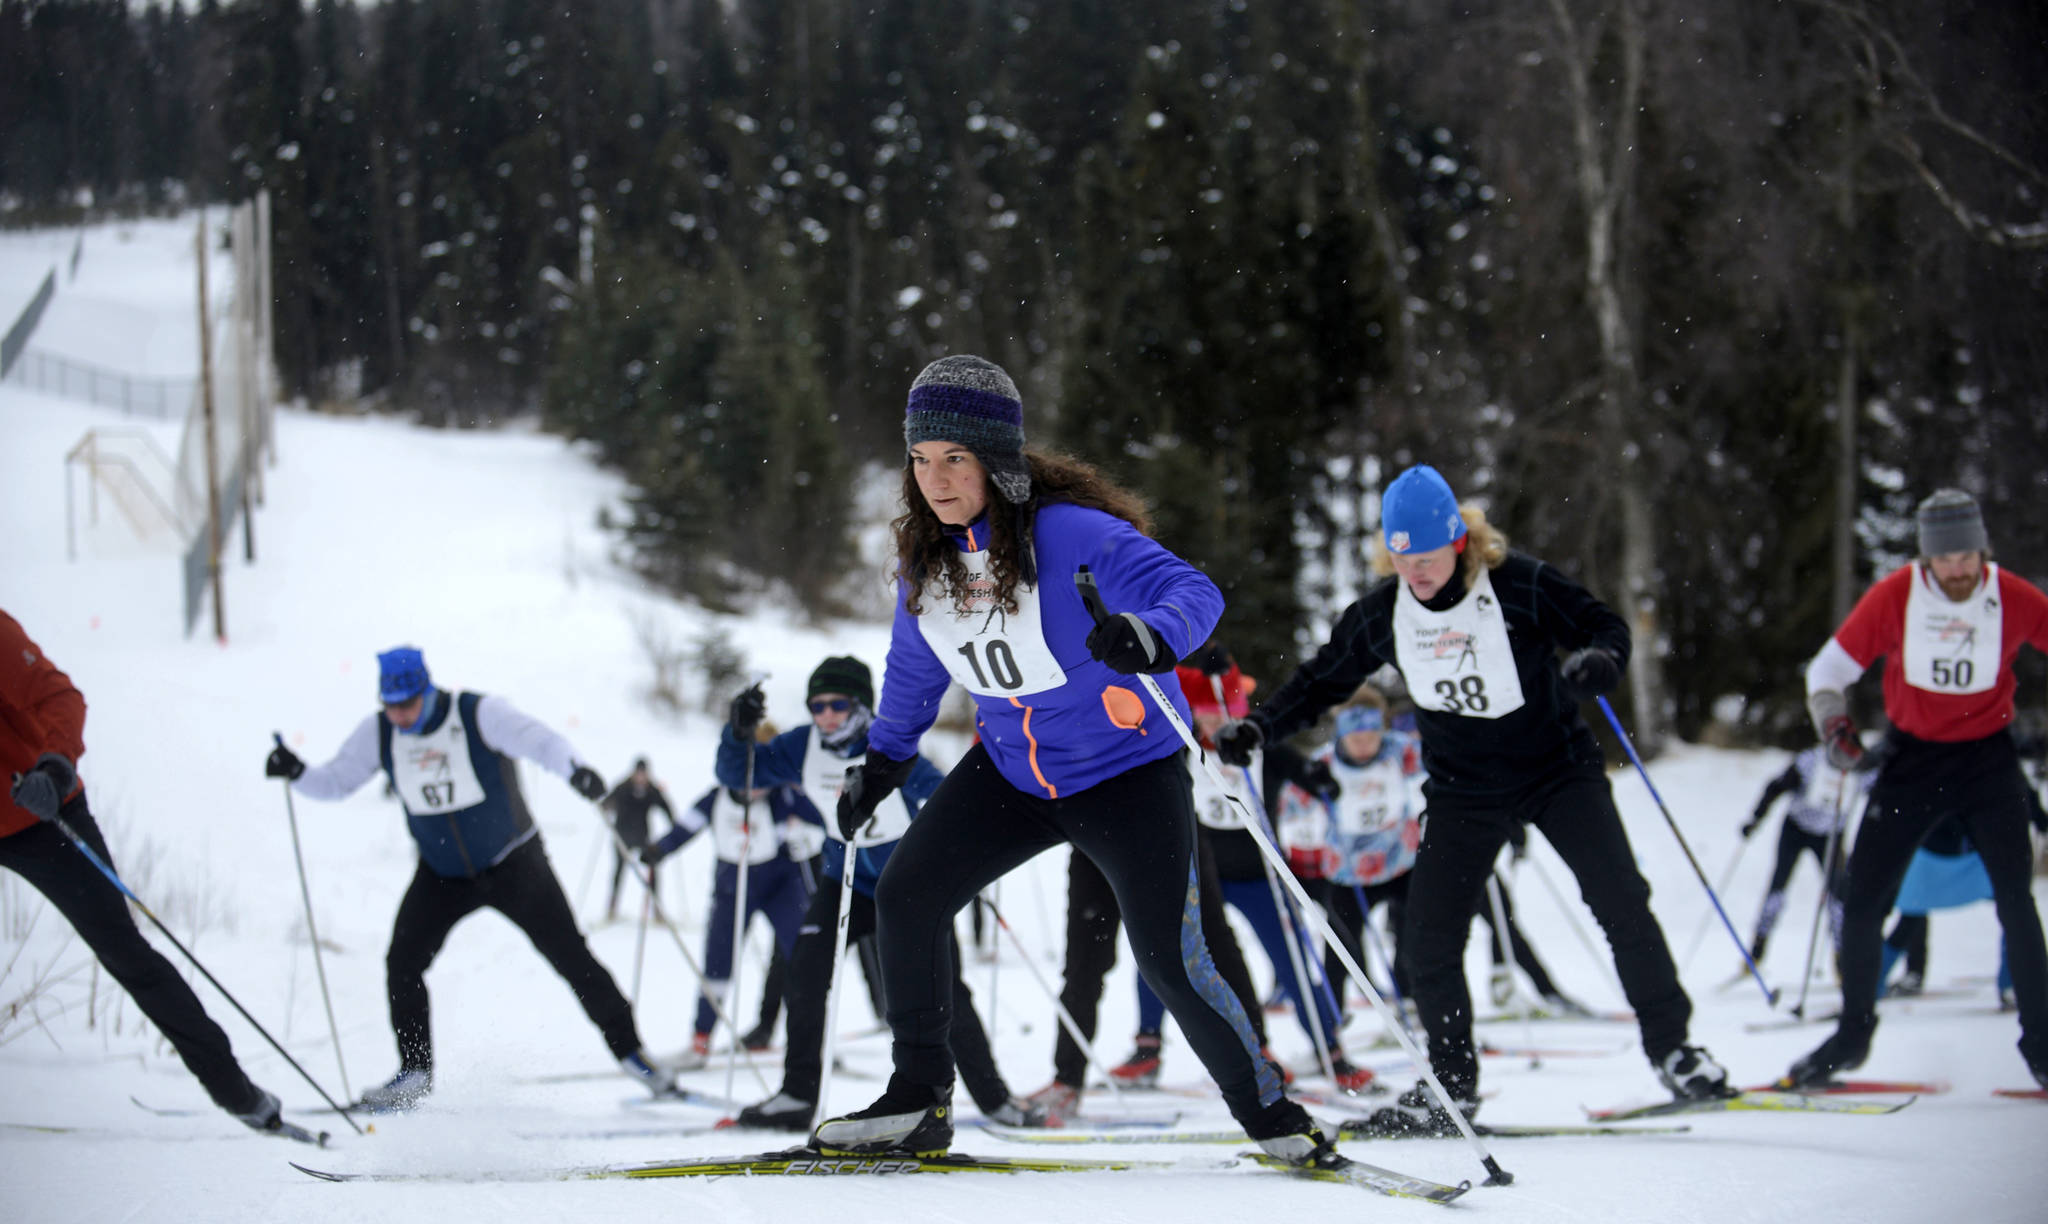 Skiers in the 20-kilometer Tour of Tsalteshi ski race reach the top of their first hill on Sunday near Soldotna. This year was the first for the Tour of Tsalteshi, in which 60 entrants raced the entire 20 kilometers of the volunteer-maintained Tsalteshi Trails ski course, while 11 raced two laps for a total of 40 kilometers.